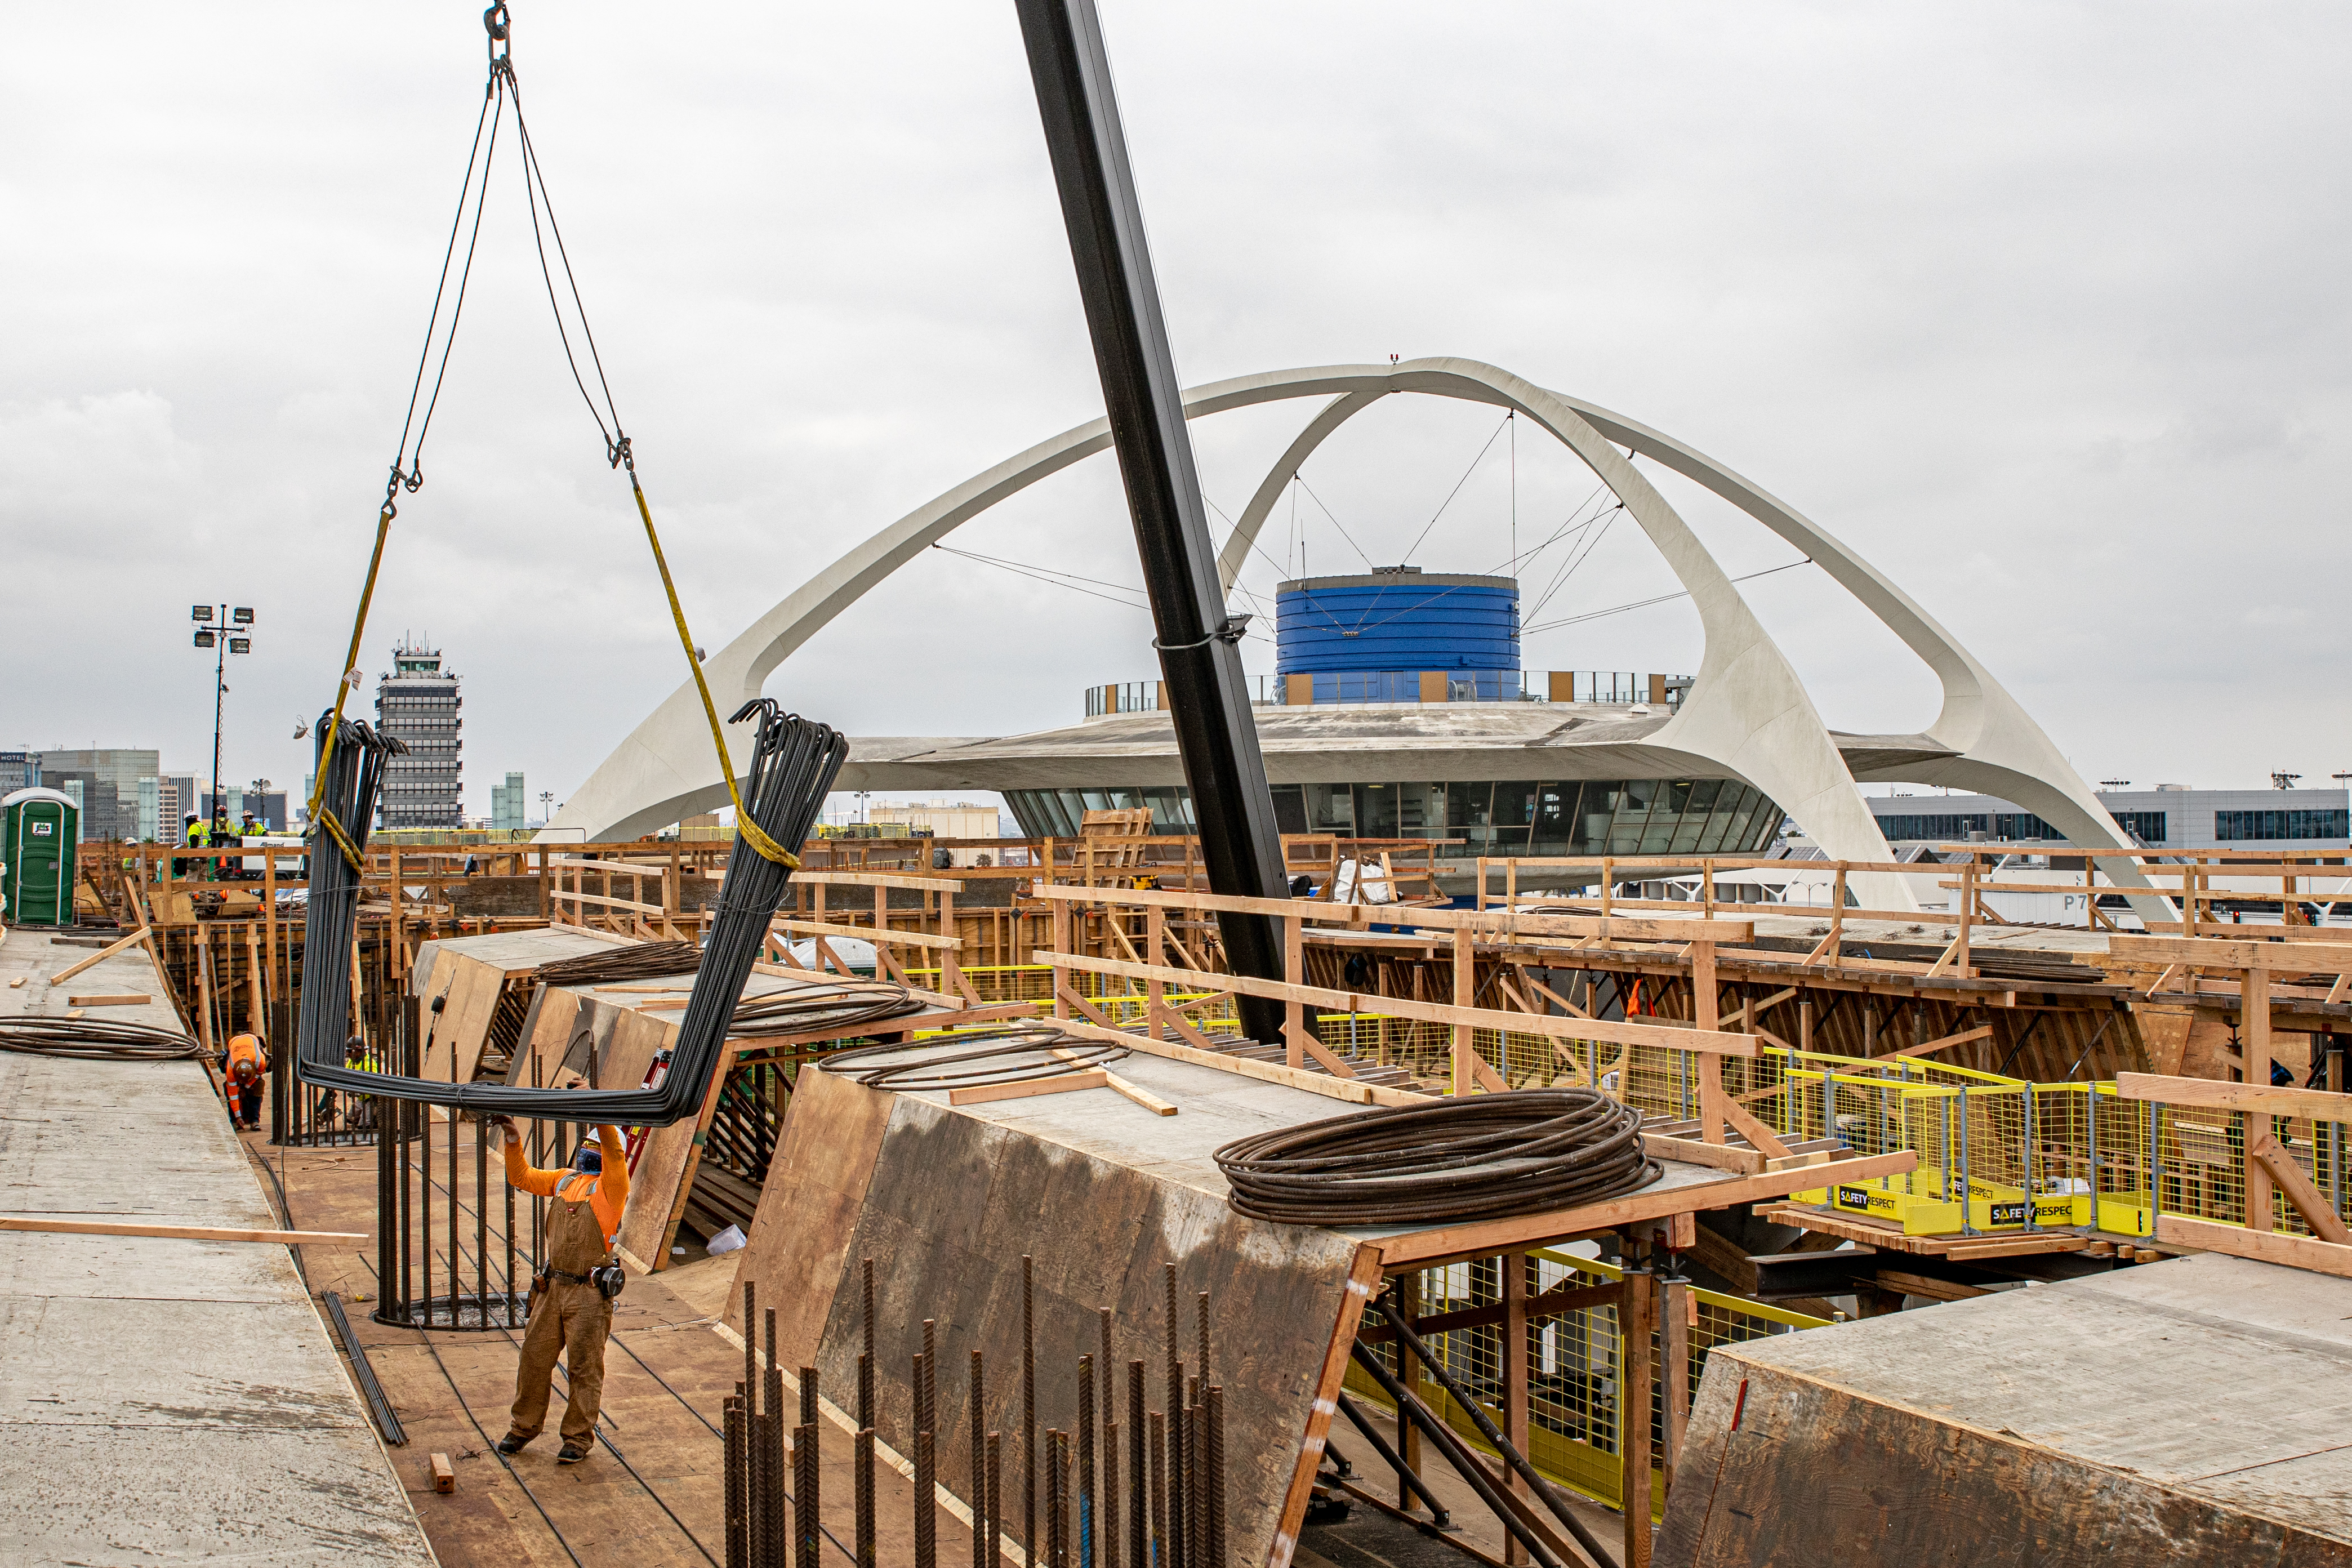 A crane is used to lift materials to the top of the falsework as an ironworker prepares to reinforce the guideway deck prior to concrete placement.